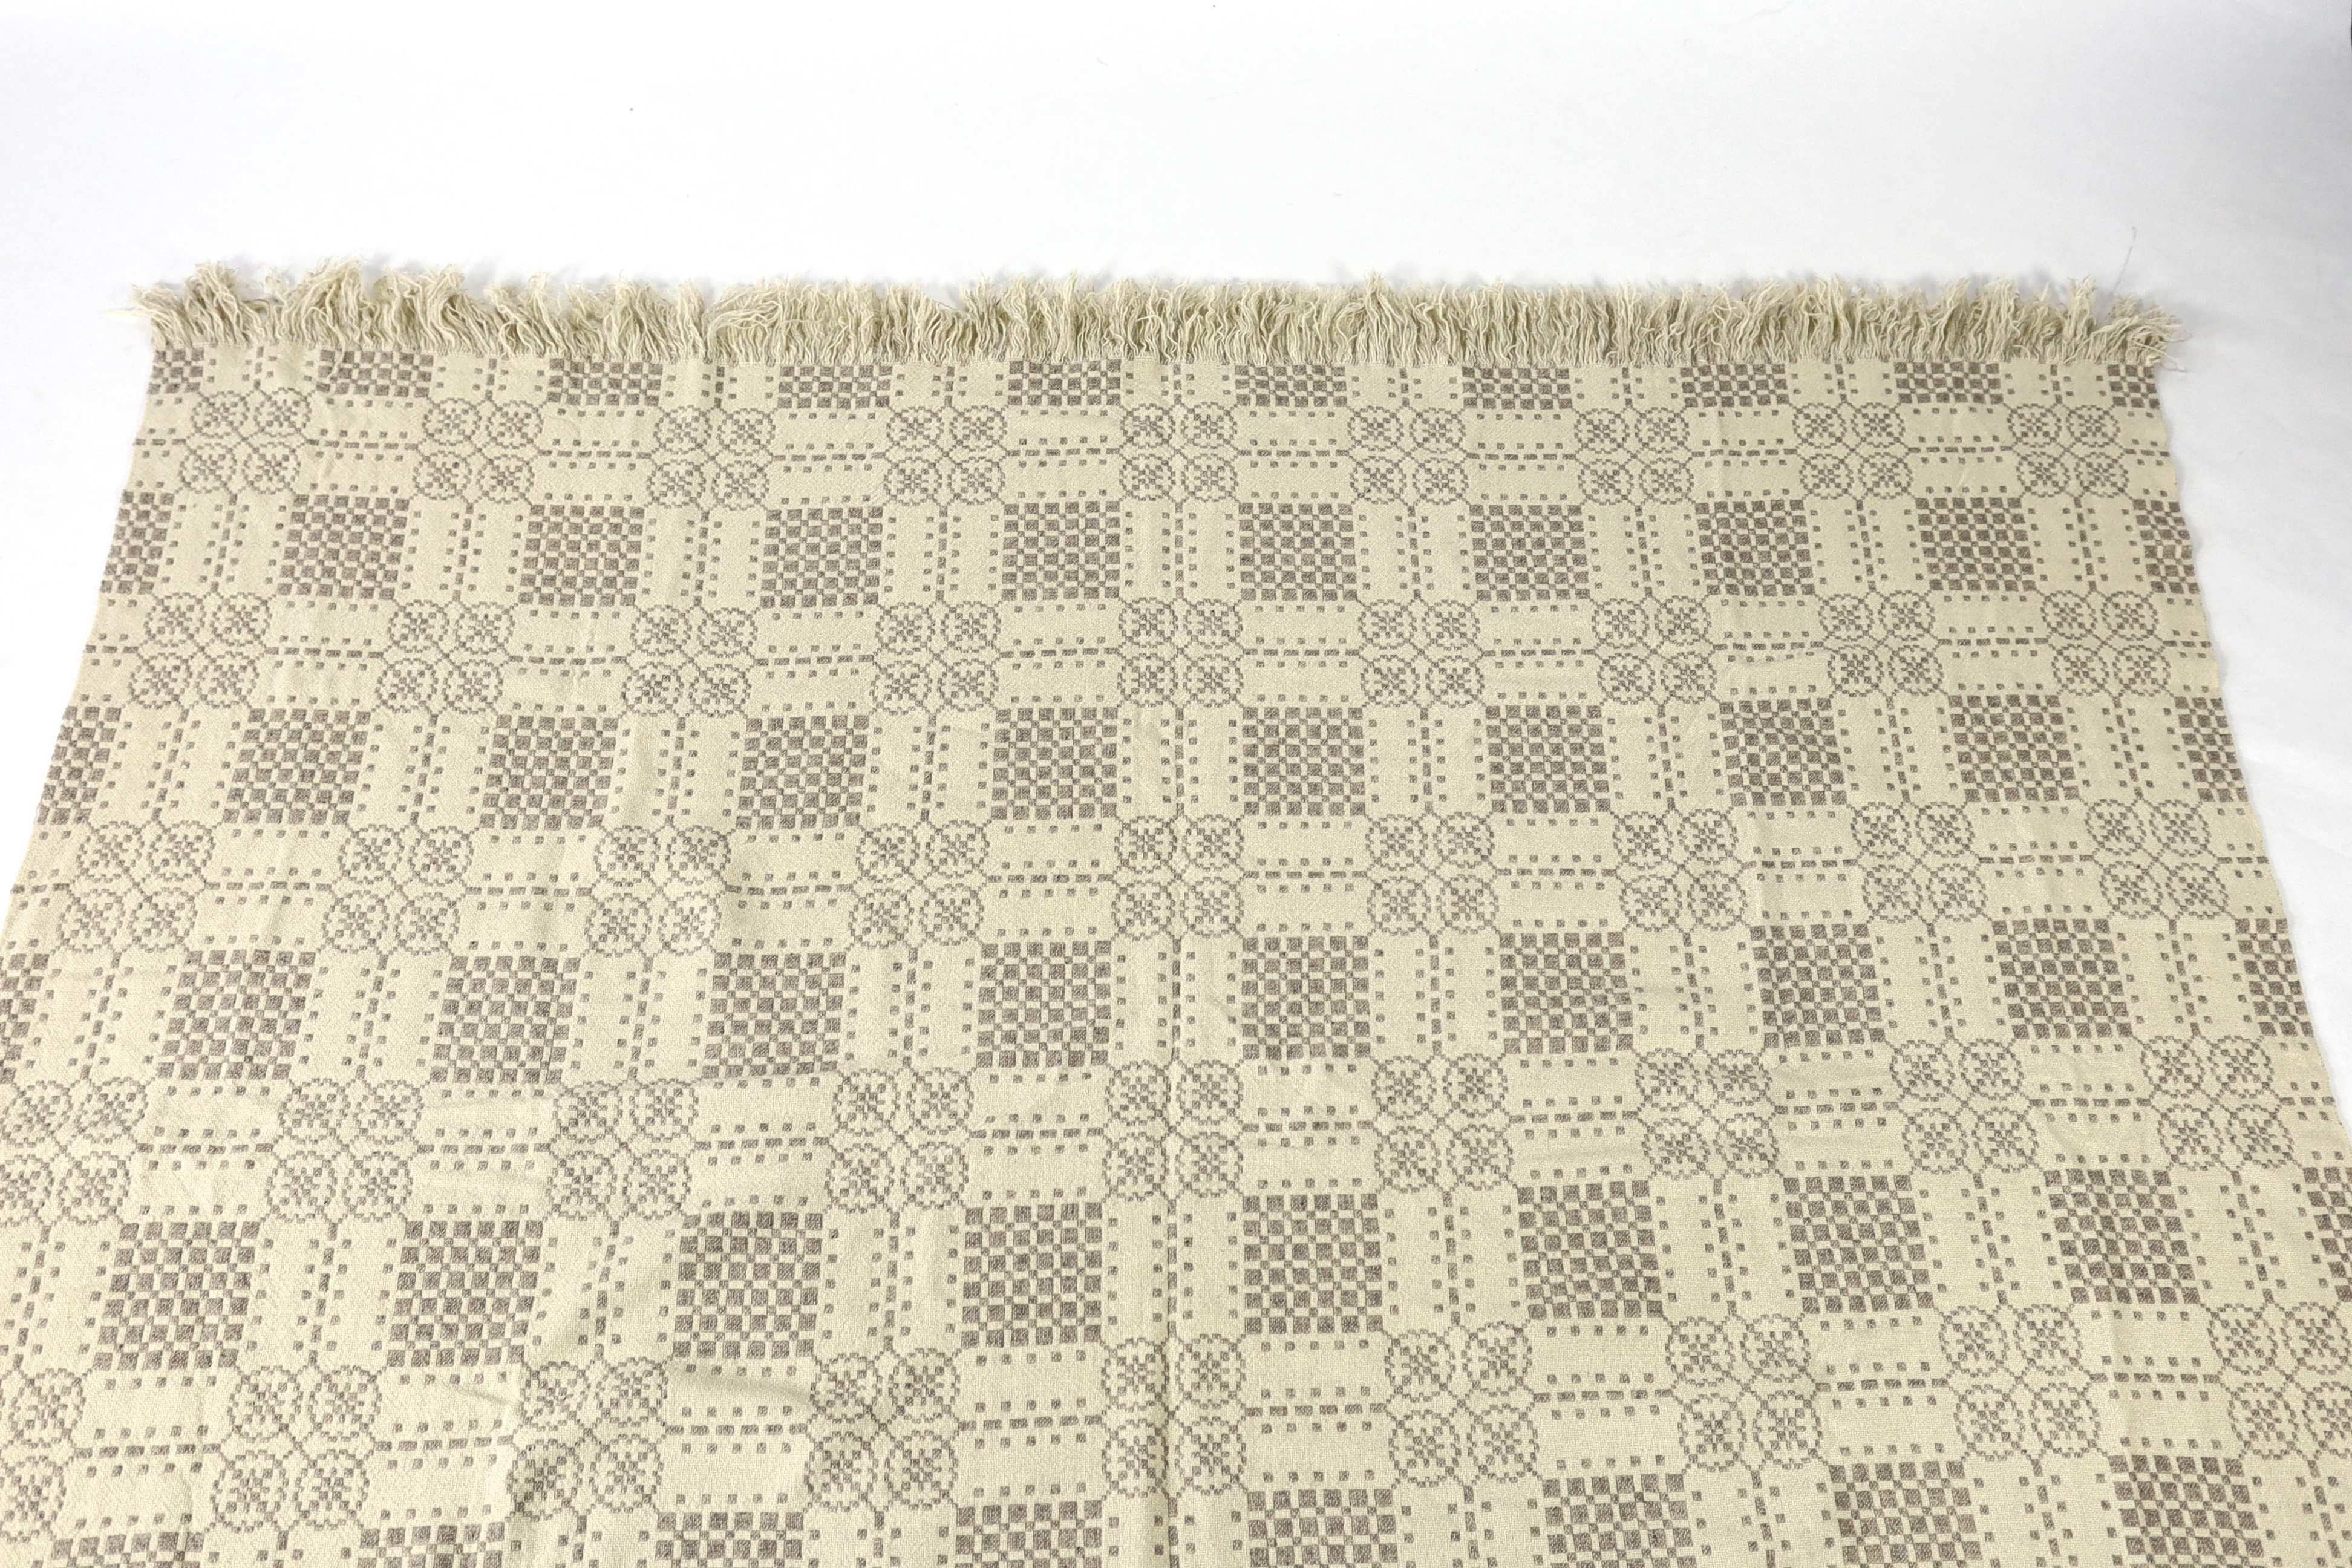 A Welsh wool woven blanket, using mushroom and cream wool in a reversible geometric design, 192cm wide x 212cm long